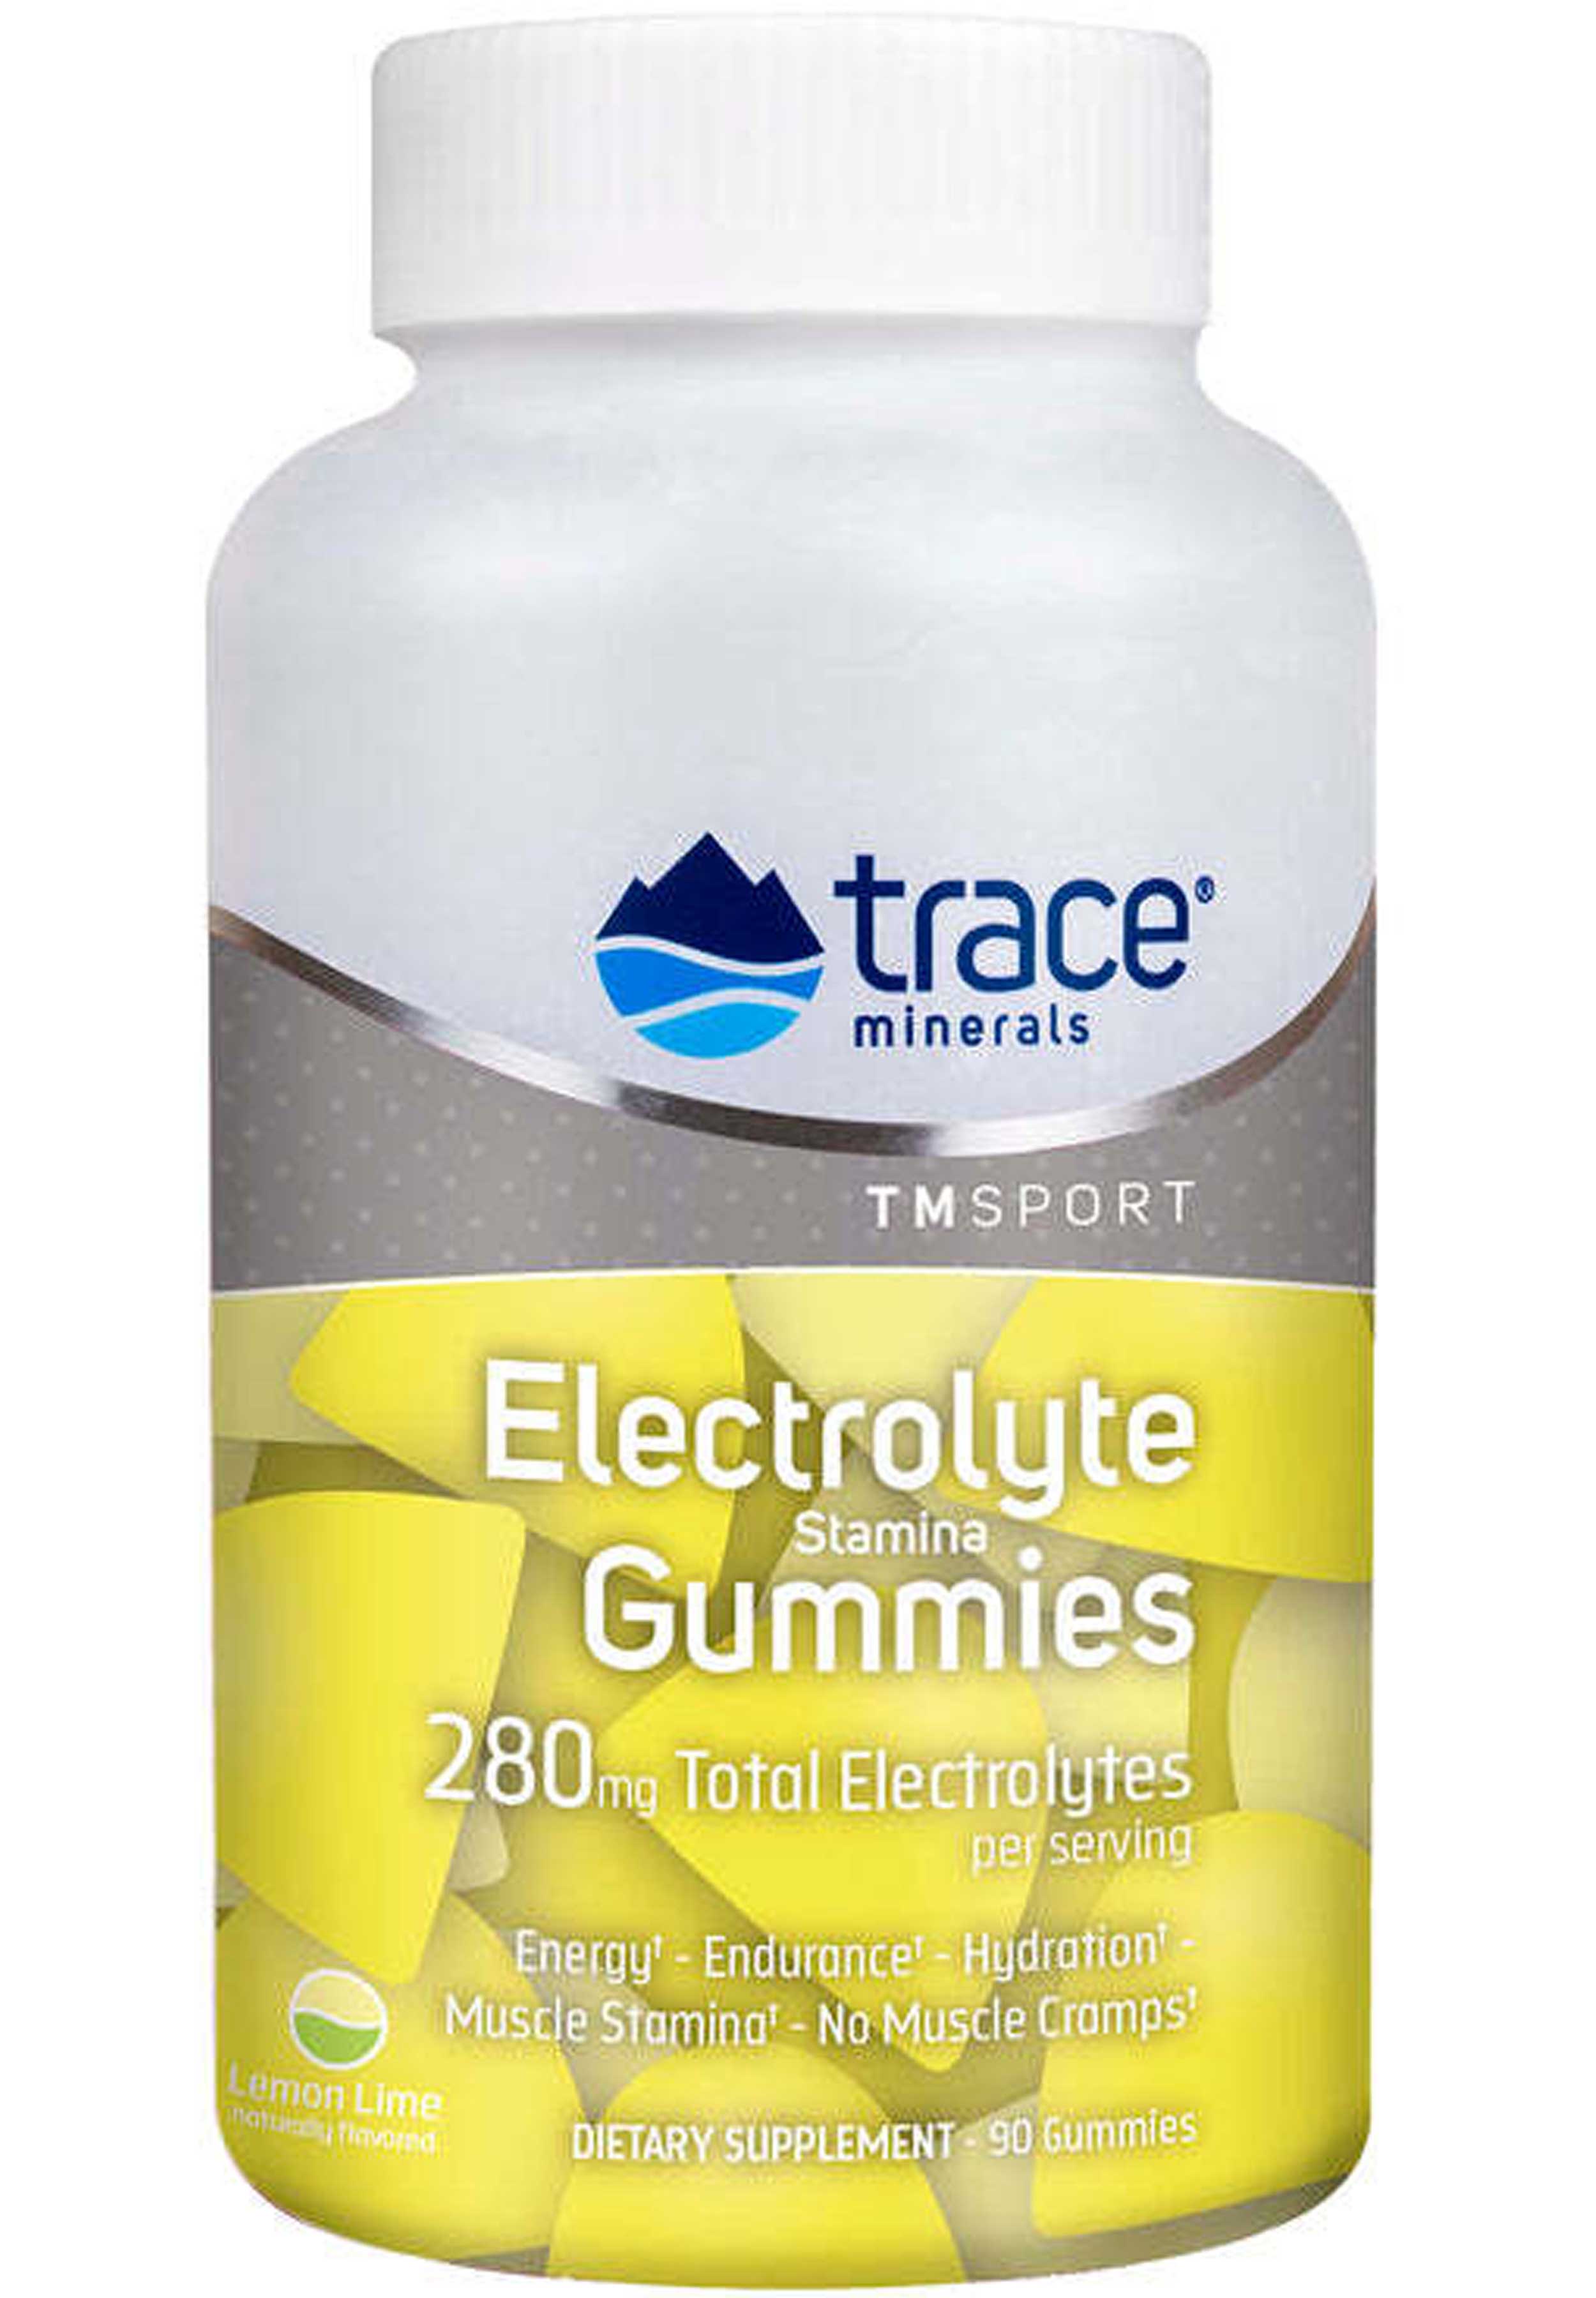 Trace Minerals Research Electrolyte Stamina Gummies Lemon Lime